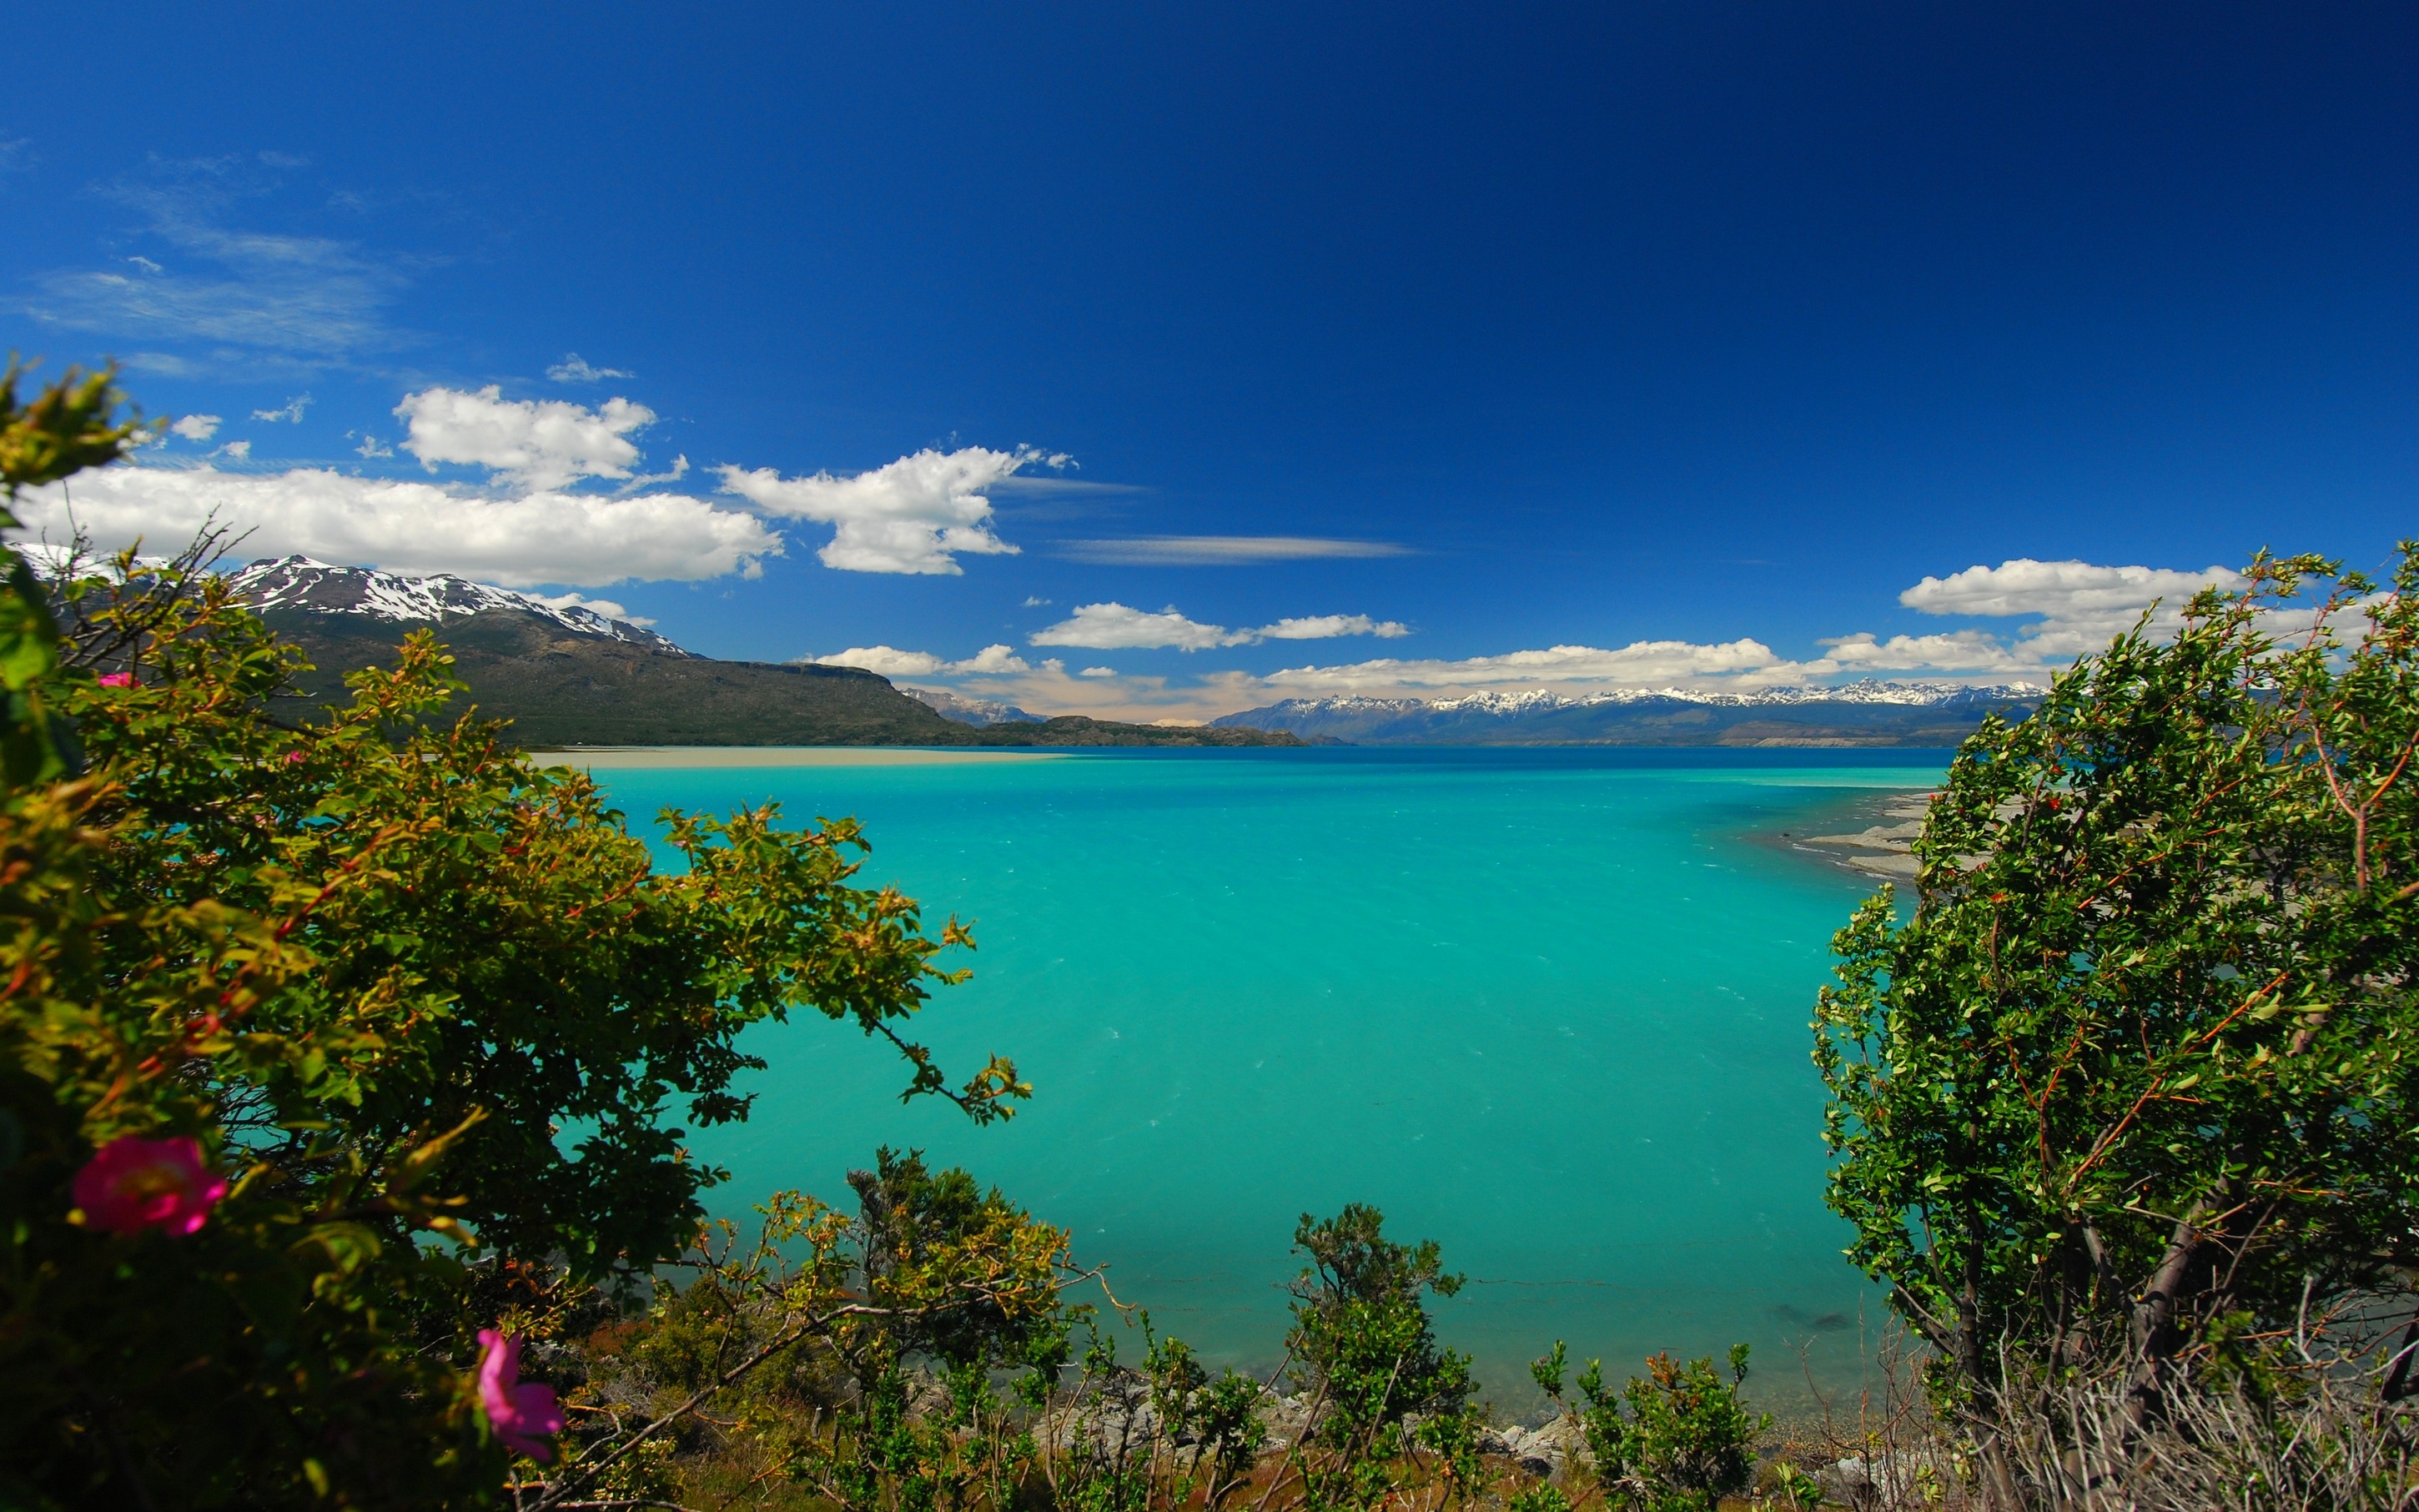 General 2900x1813 nature photography landscape lake turquoise water trees mountains wildflowers wind clouds Patagonia Chile sky